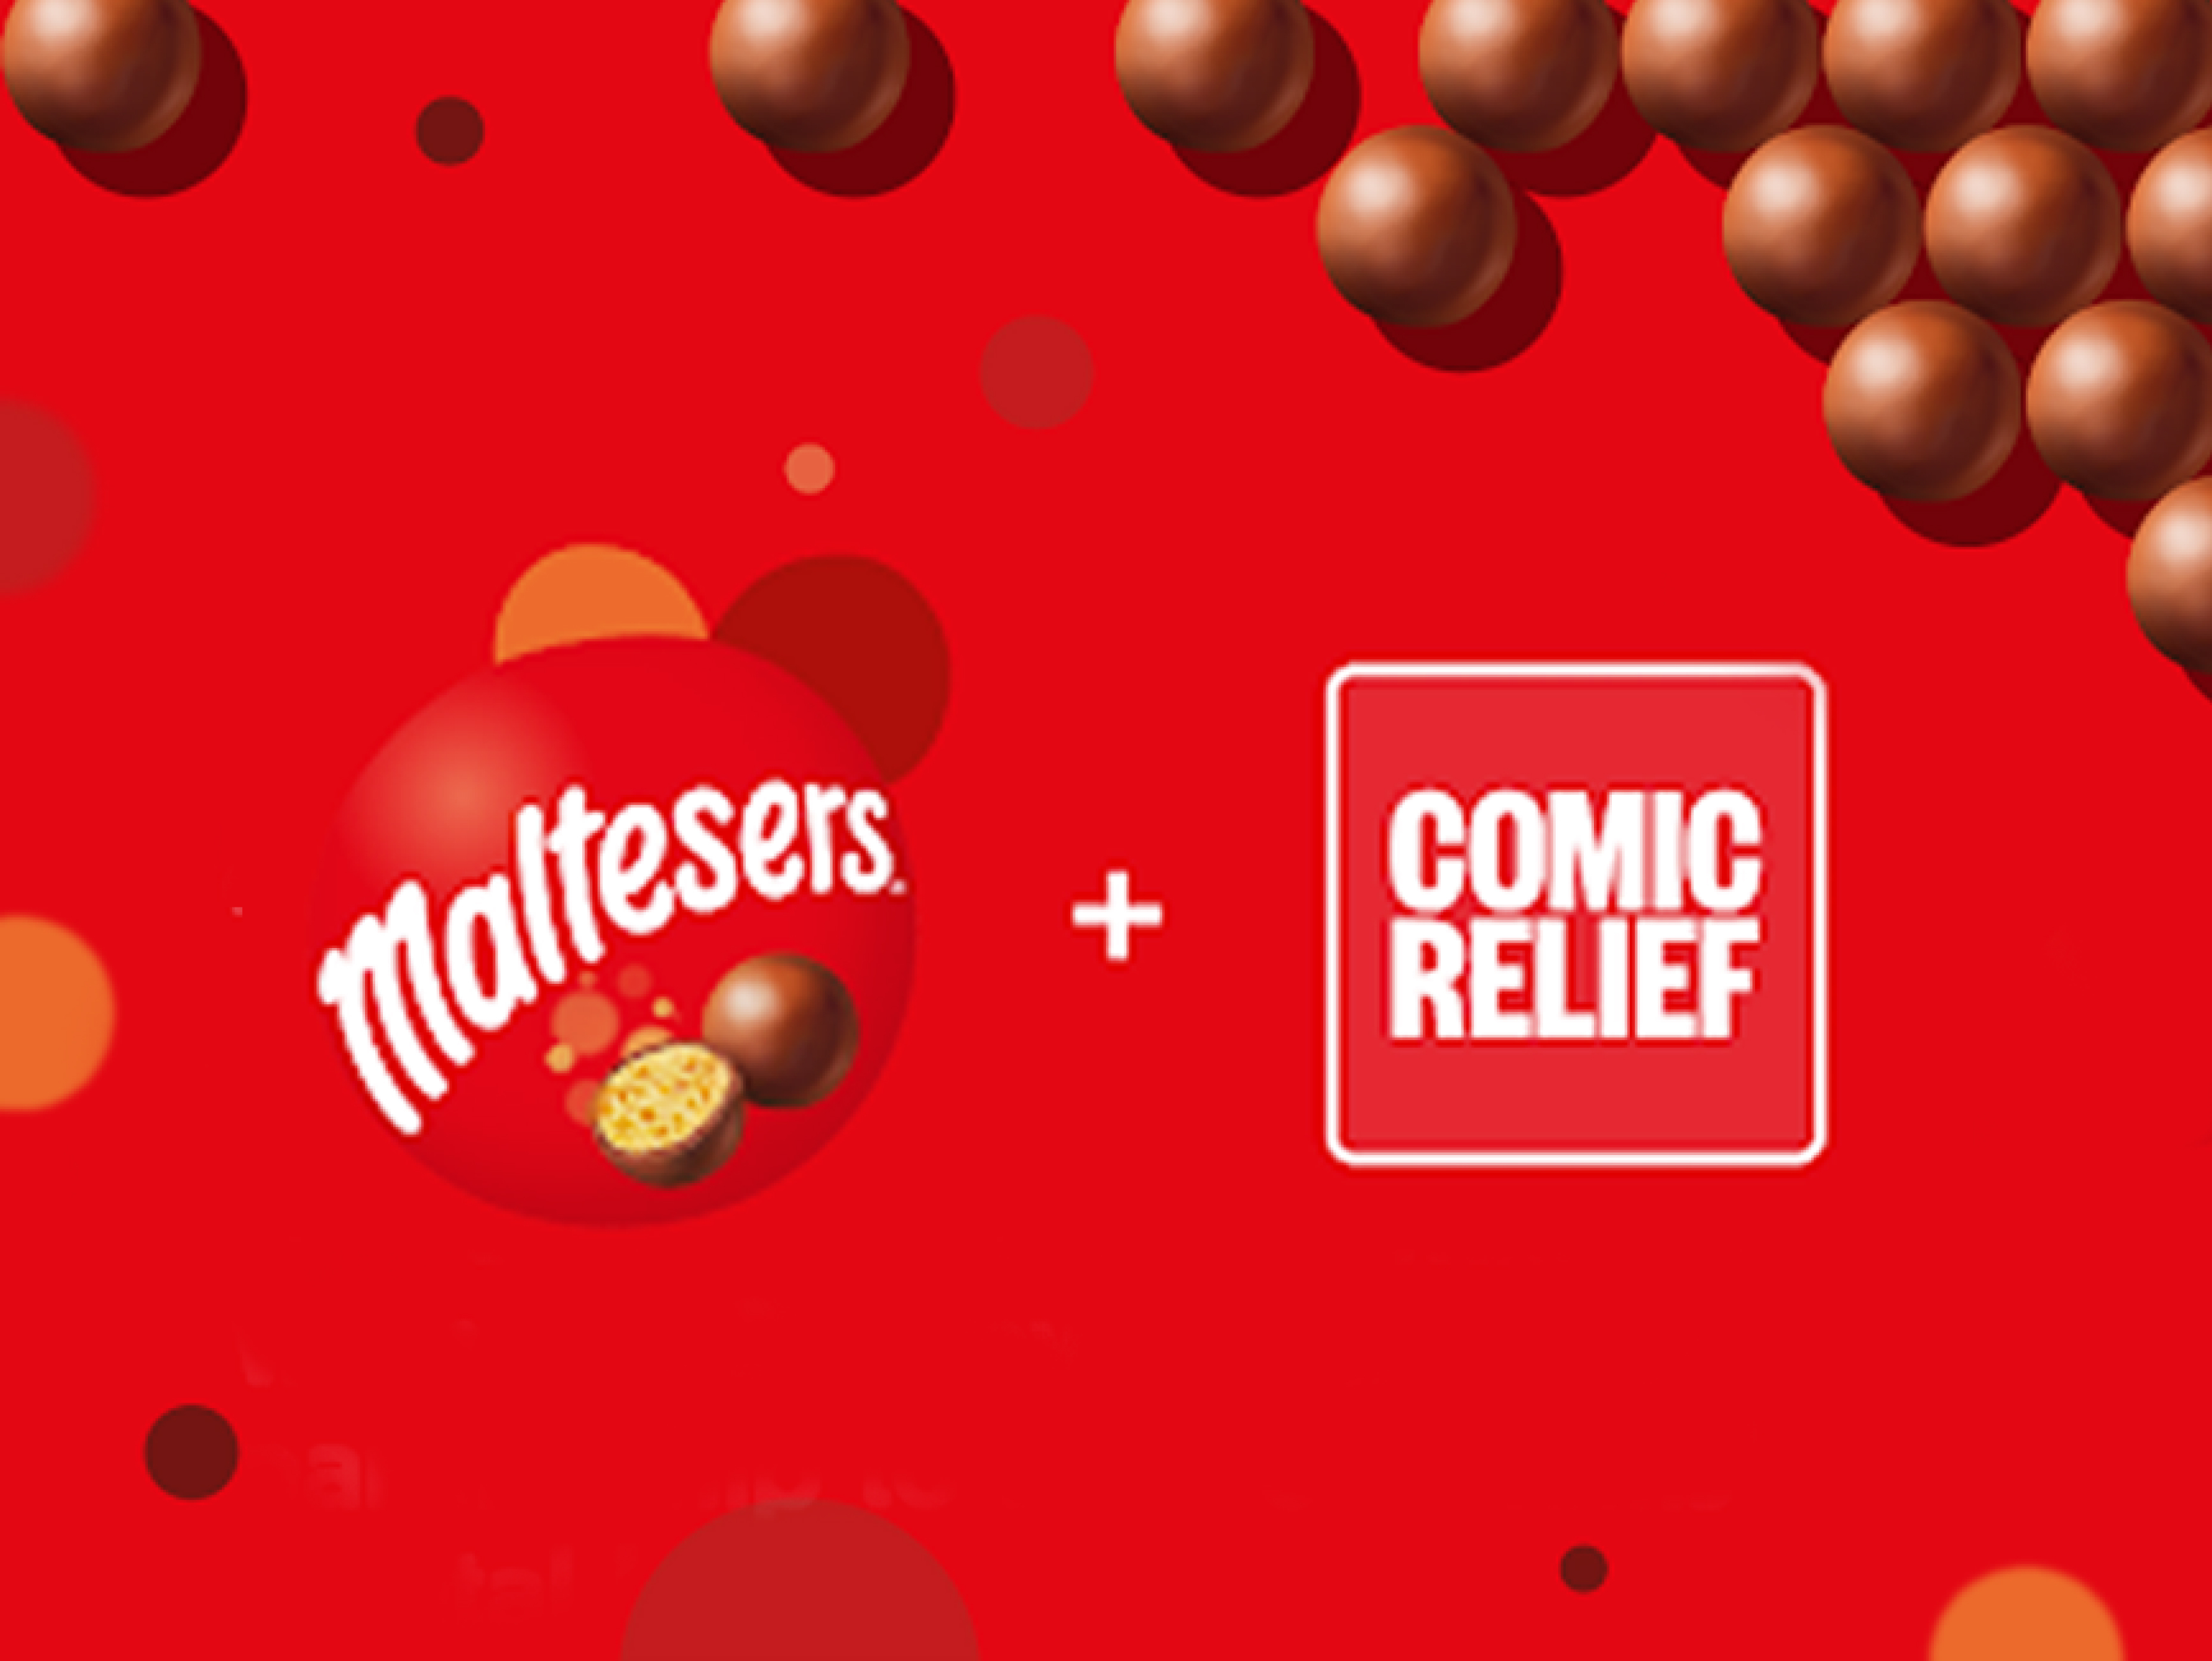 Maltesers and Comic Relief logos surrounded by Maltesers on a red background